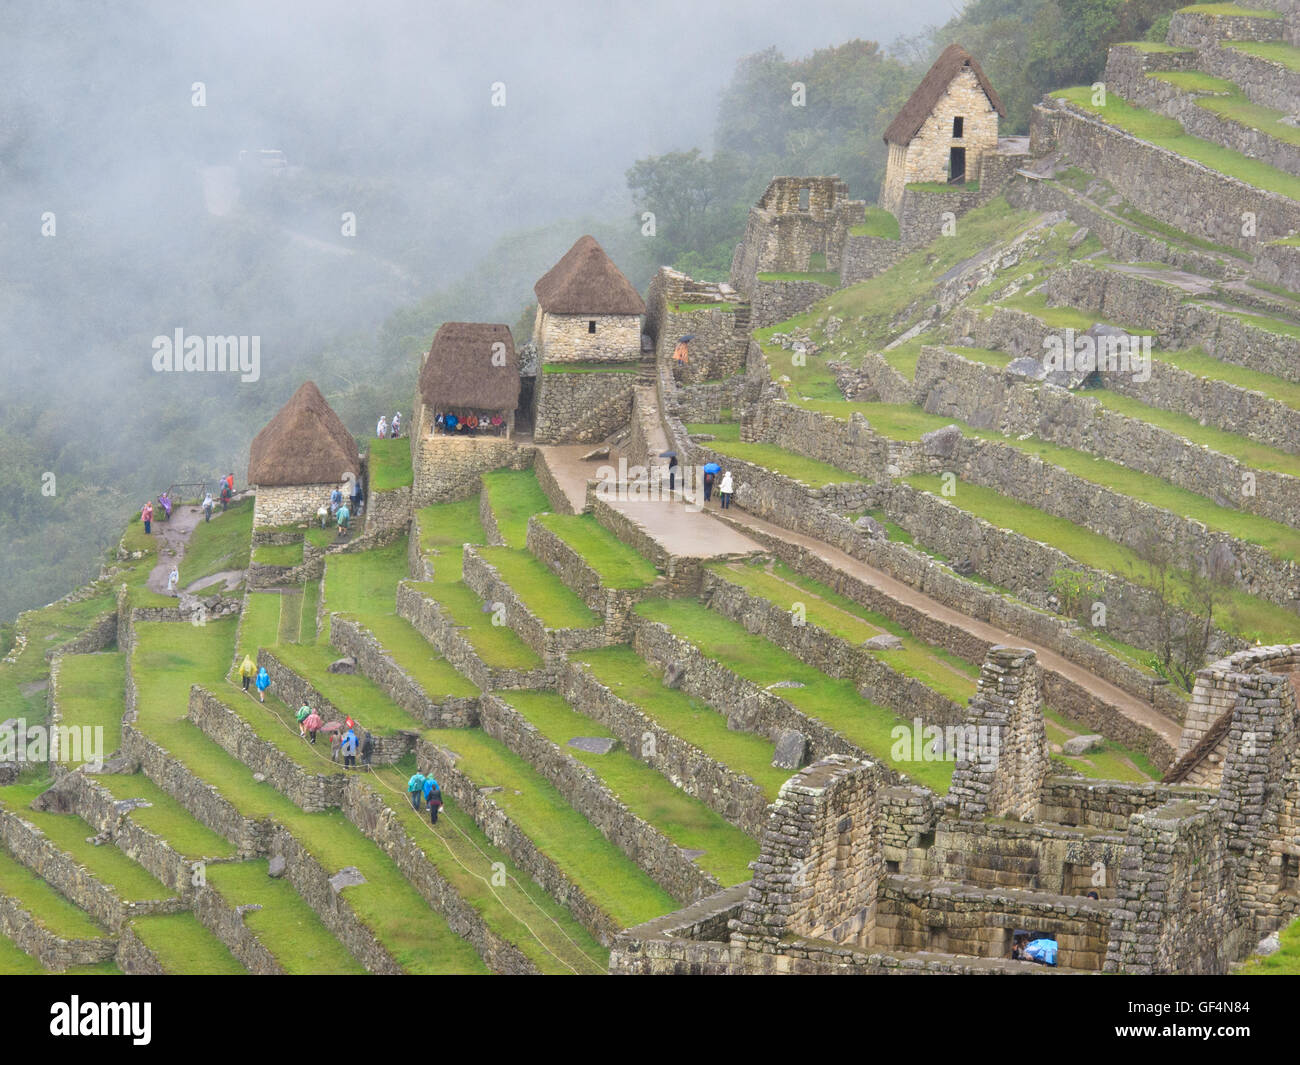 The agricultural terraces of Machu Picchu Stock Photo